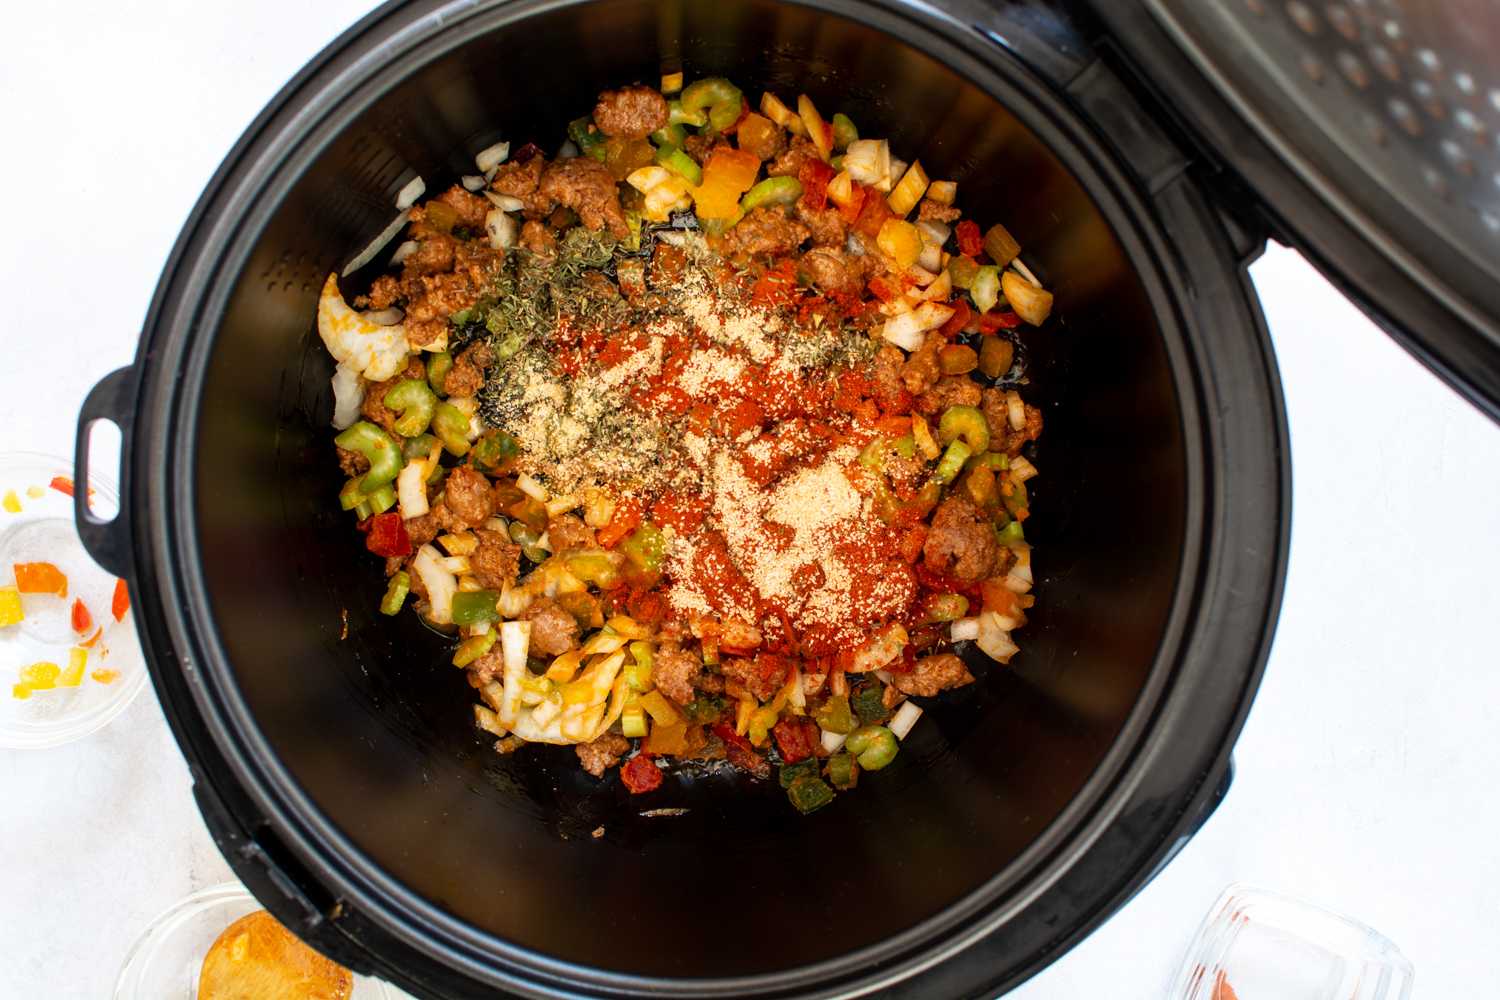 Is Instant Pot a Good Slow Cooker? - Corrie Cooks